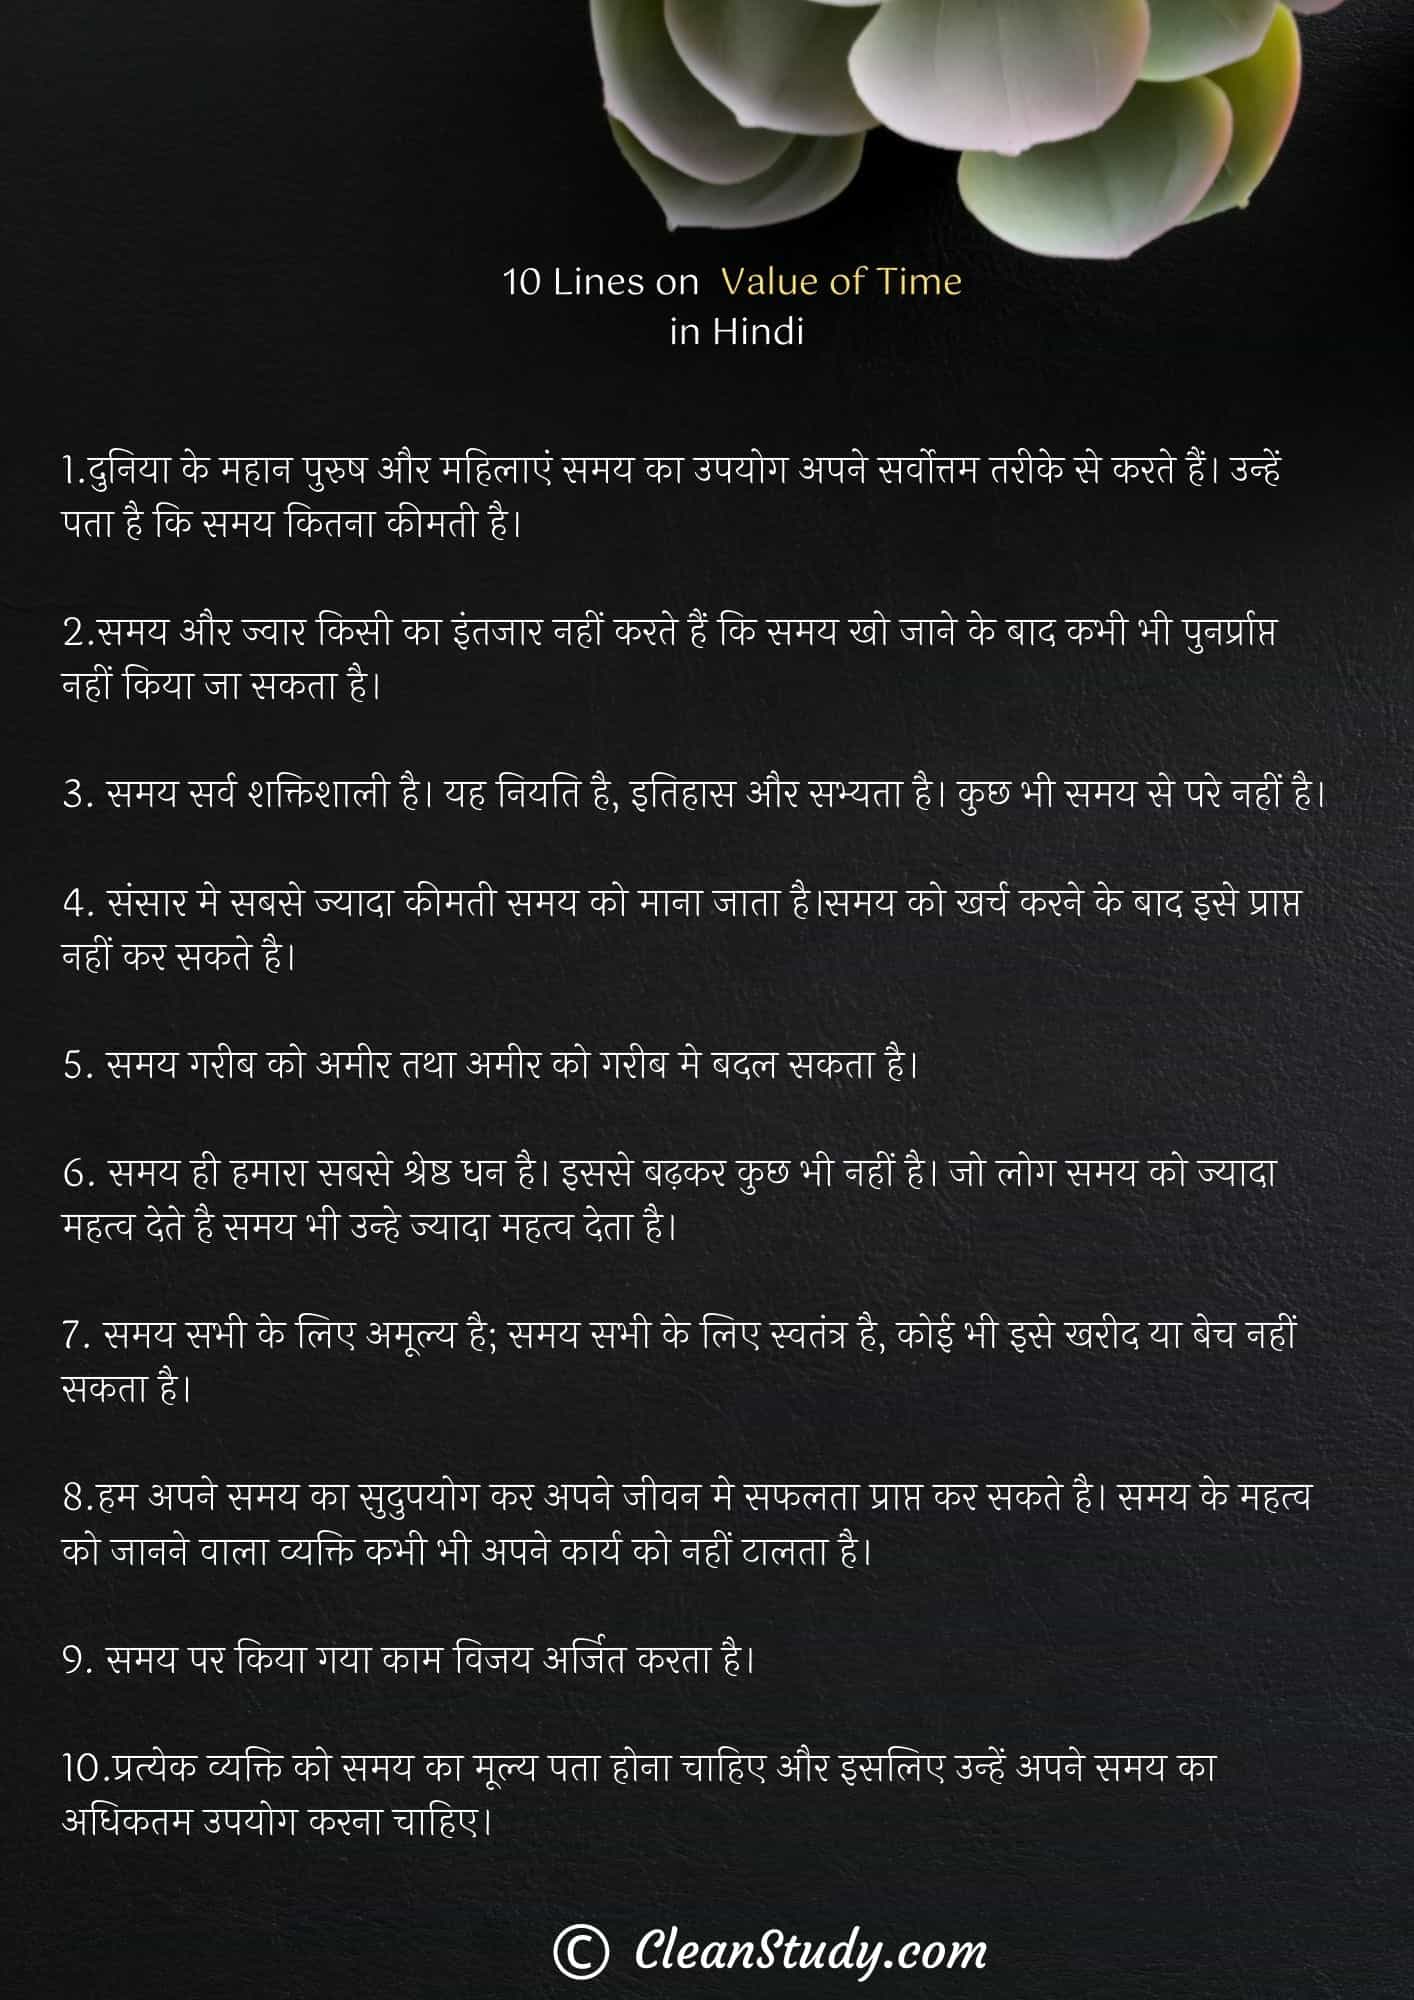 10 Lines on Value of Time in Hindi